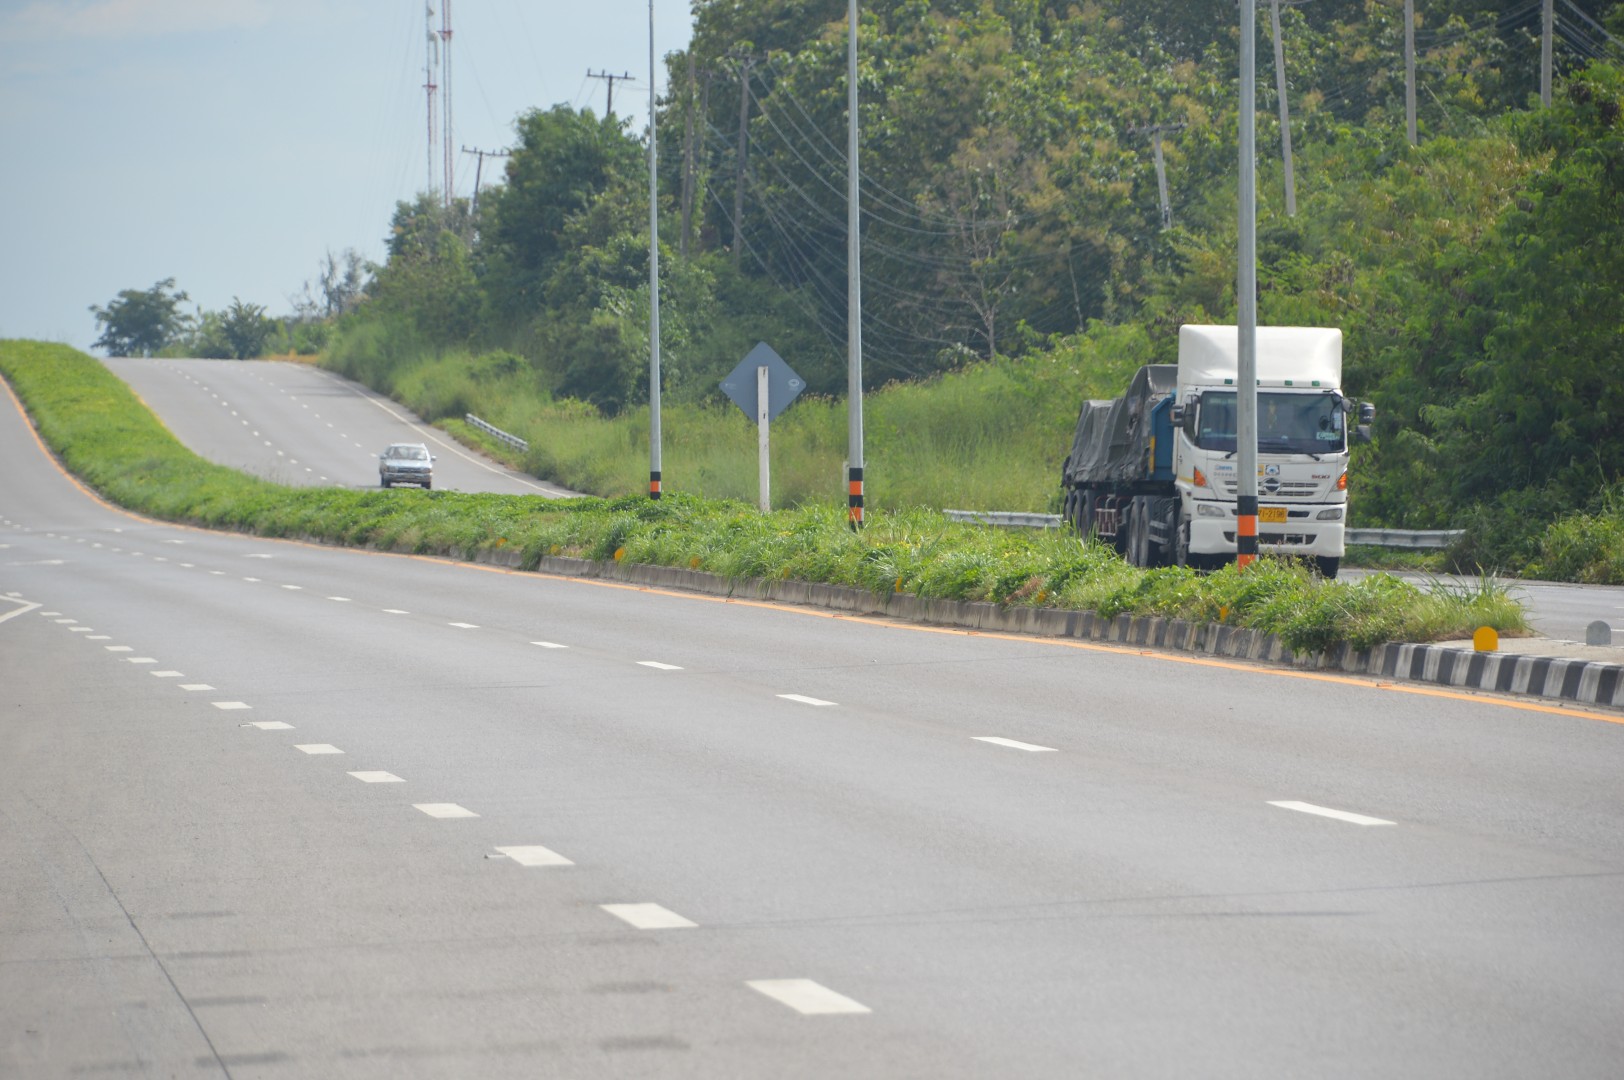 highway median in Lampang, Thailand recently sodded with manilagrass and now overtaken by weeds